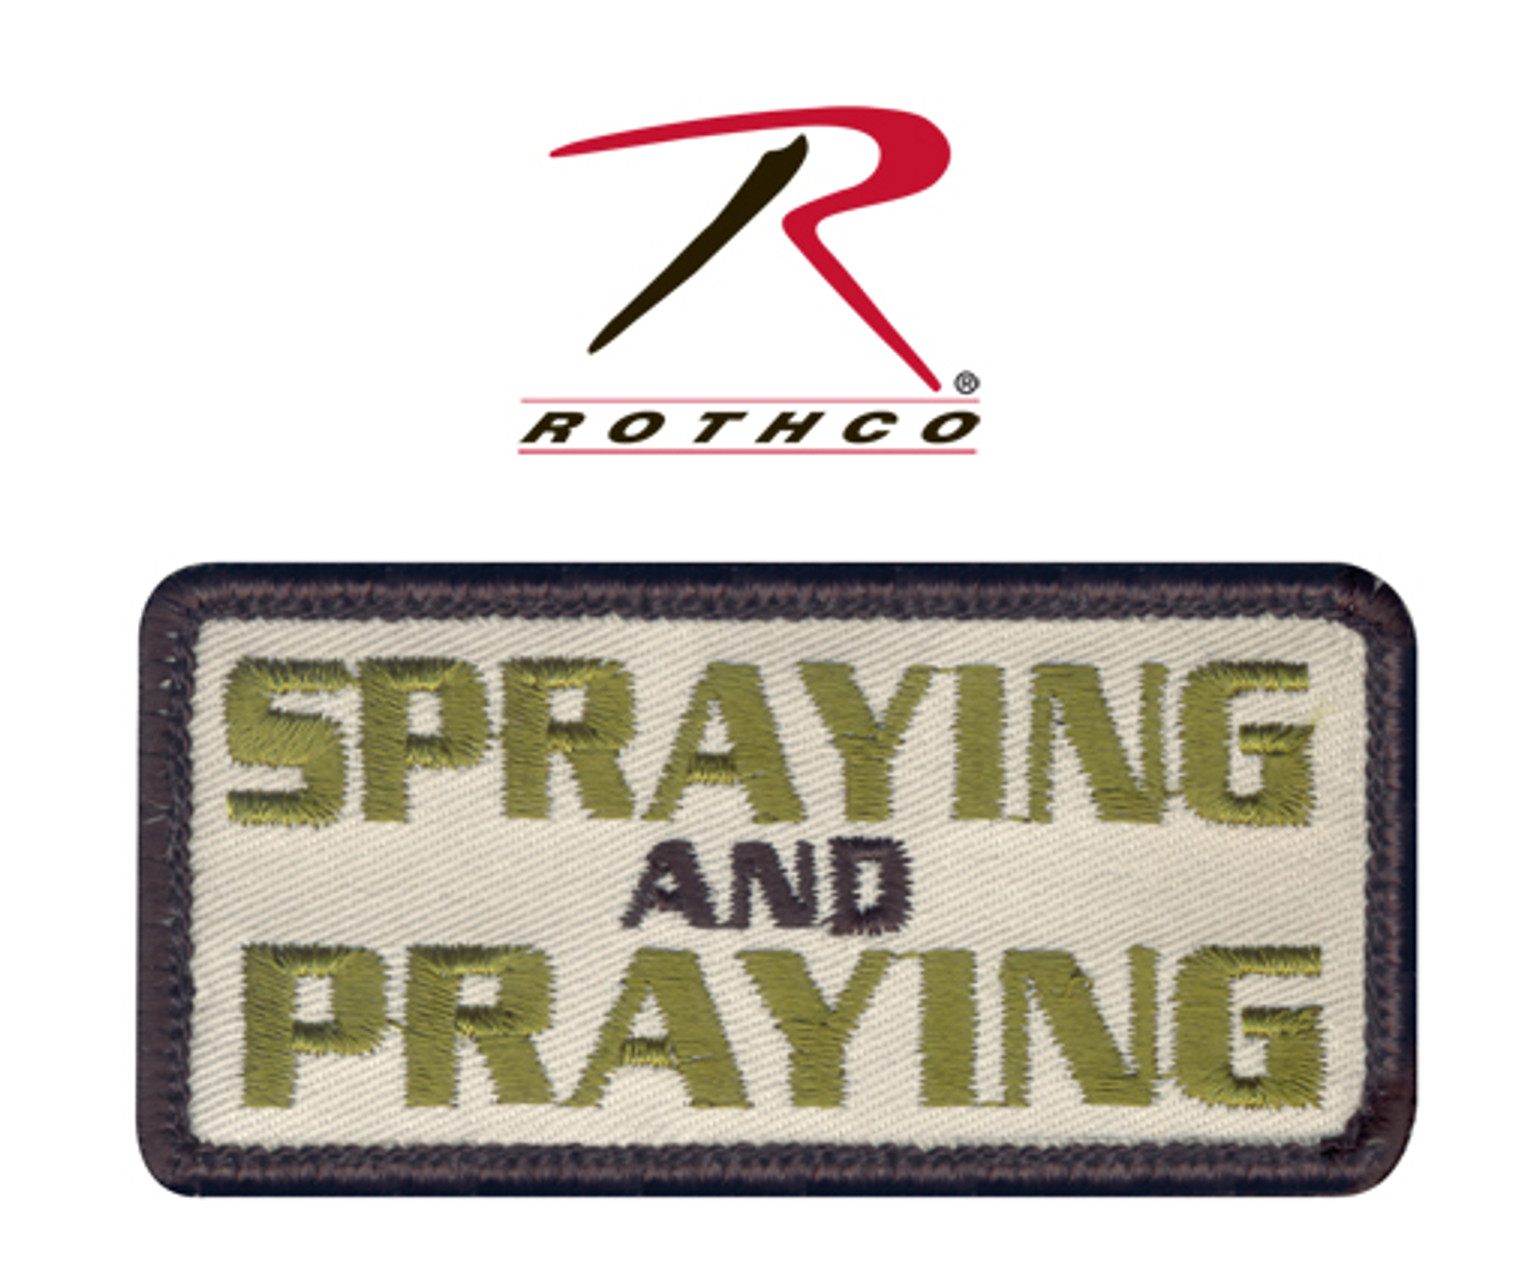 Rothco Spraying and Praying Morale Patch